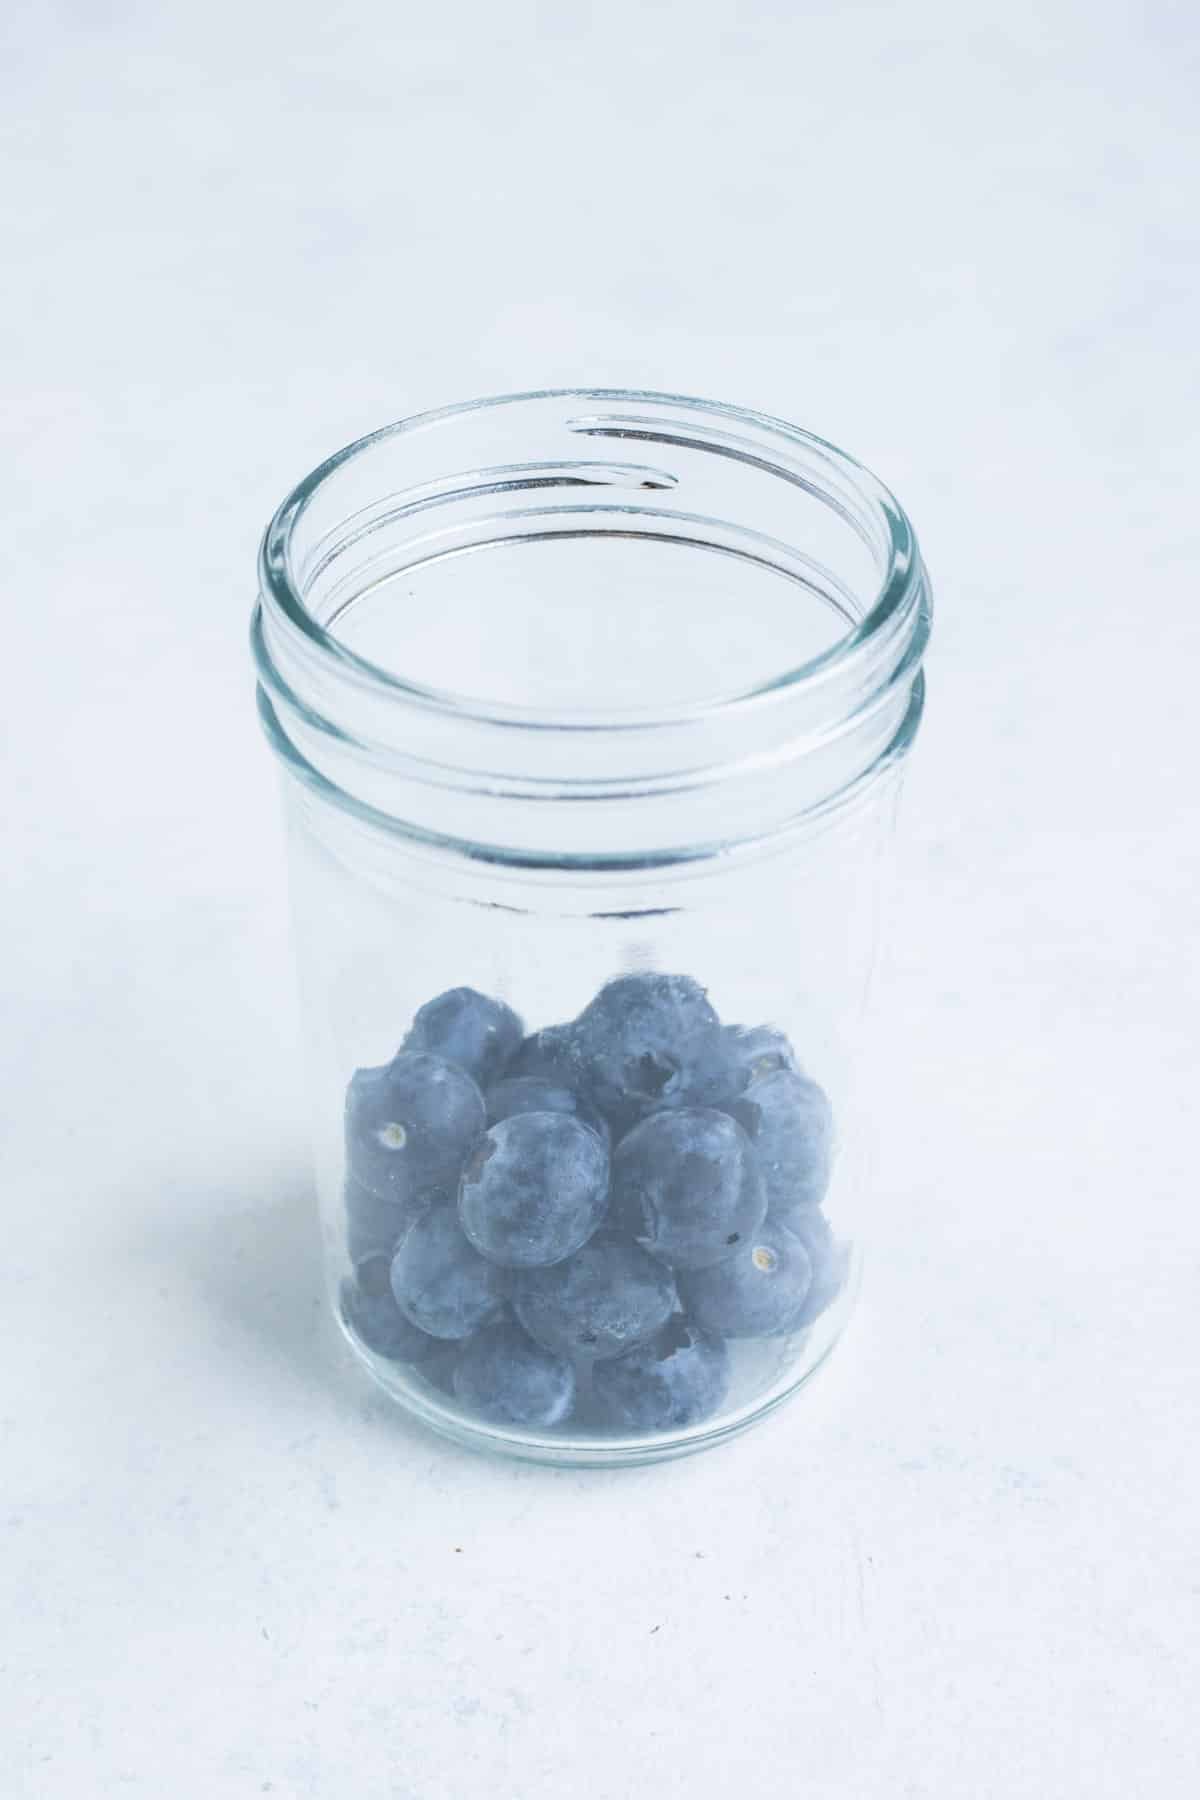 Blueberries are added to a mason jar.